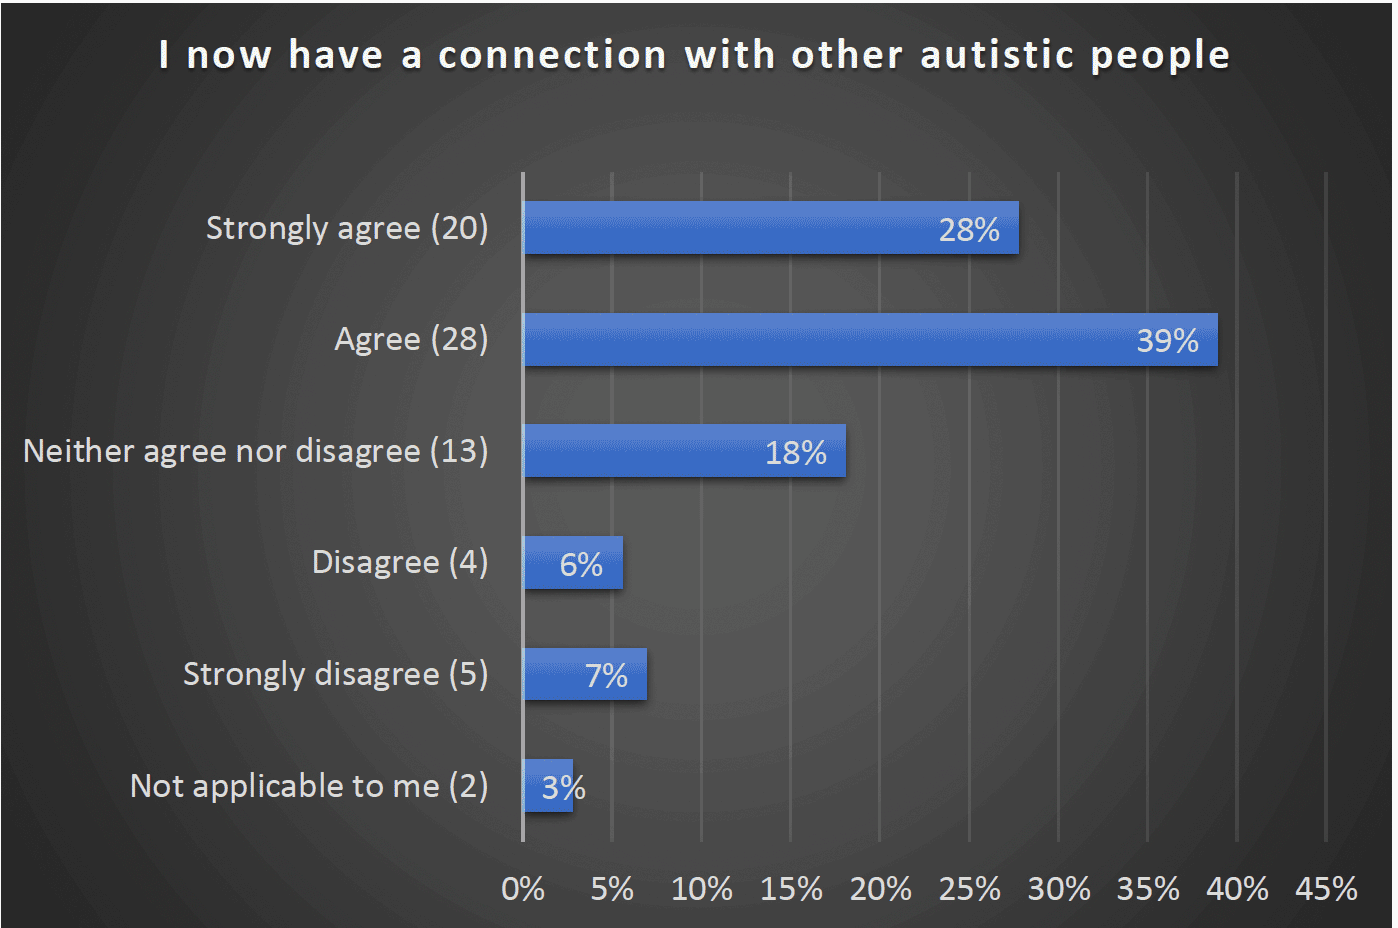 I now have a connection with other autistic people - Strongly agree (20) 28%, Agree (28) 39%, Neither agree nor disagree (13) 18%, Disagree (4) 6%, Strongly disagree (5) 7%, Not applicable to me (2) 3%